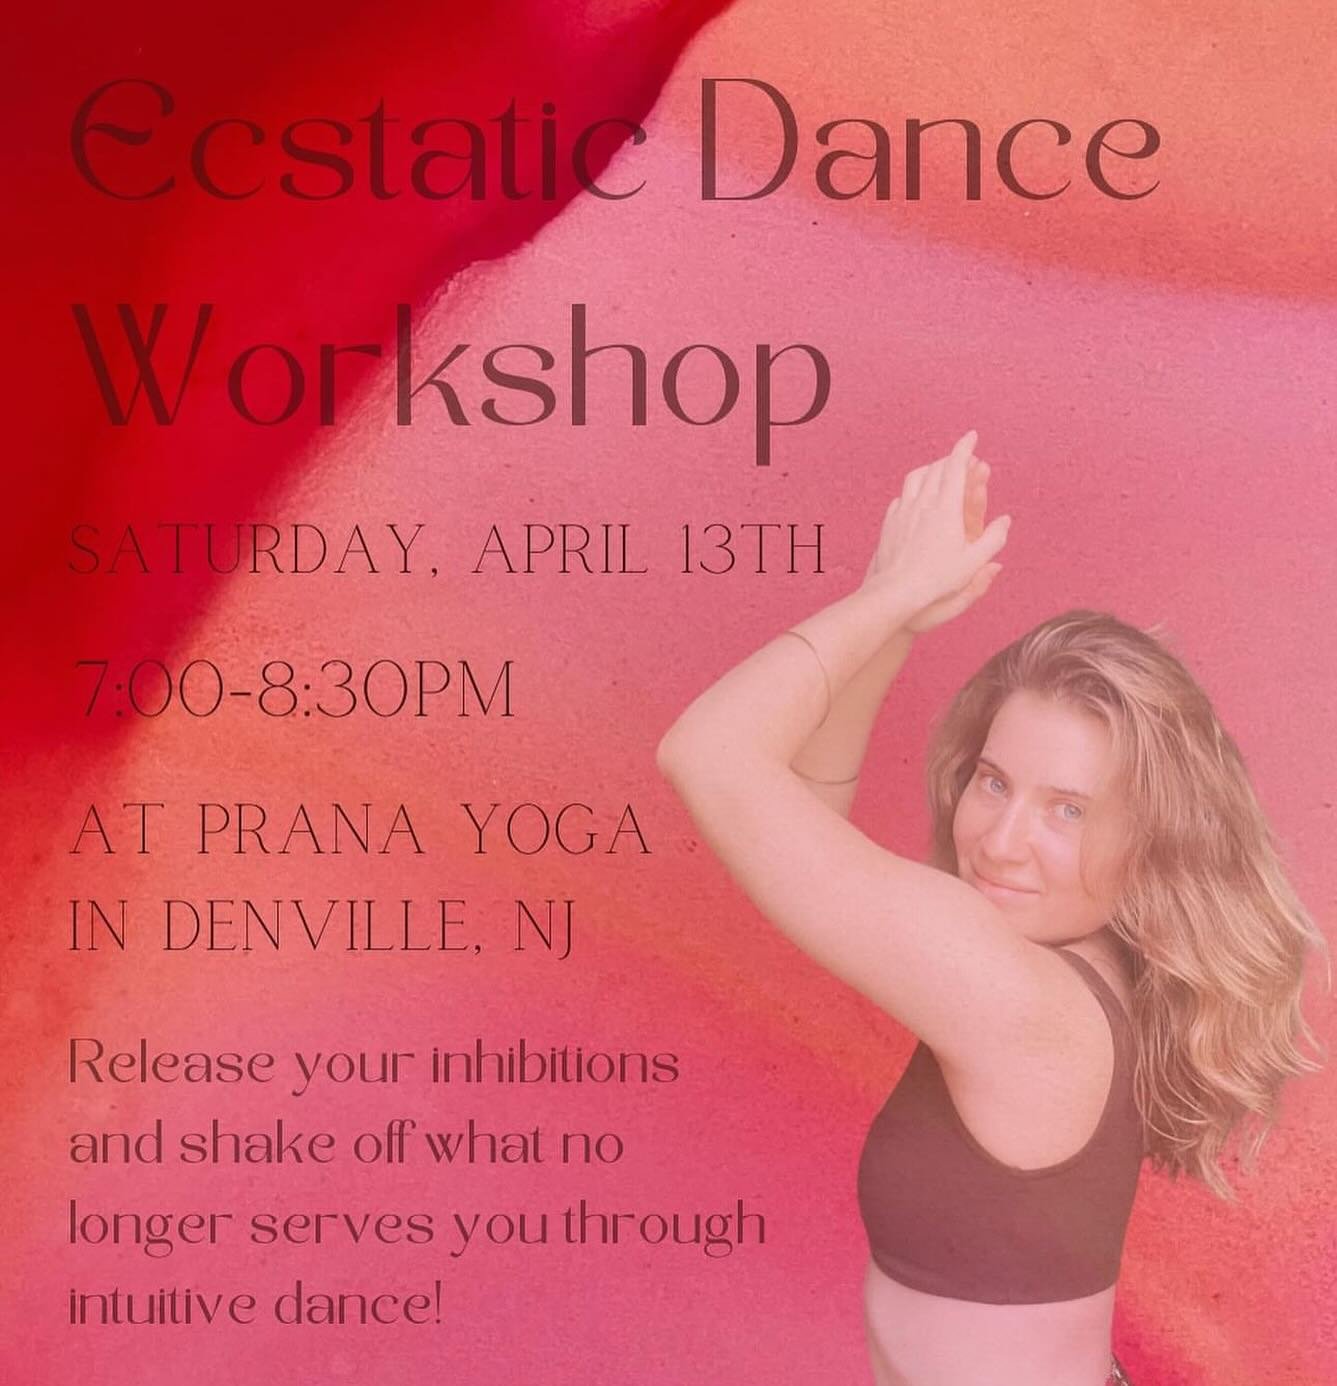 Ecstatic Dance today! Join @alysha__beth this evening from 7-8:30pm! Register through the workshops link in our bio, website, or app!